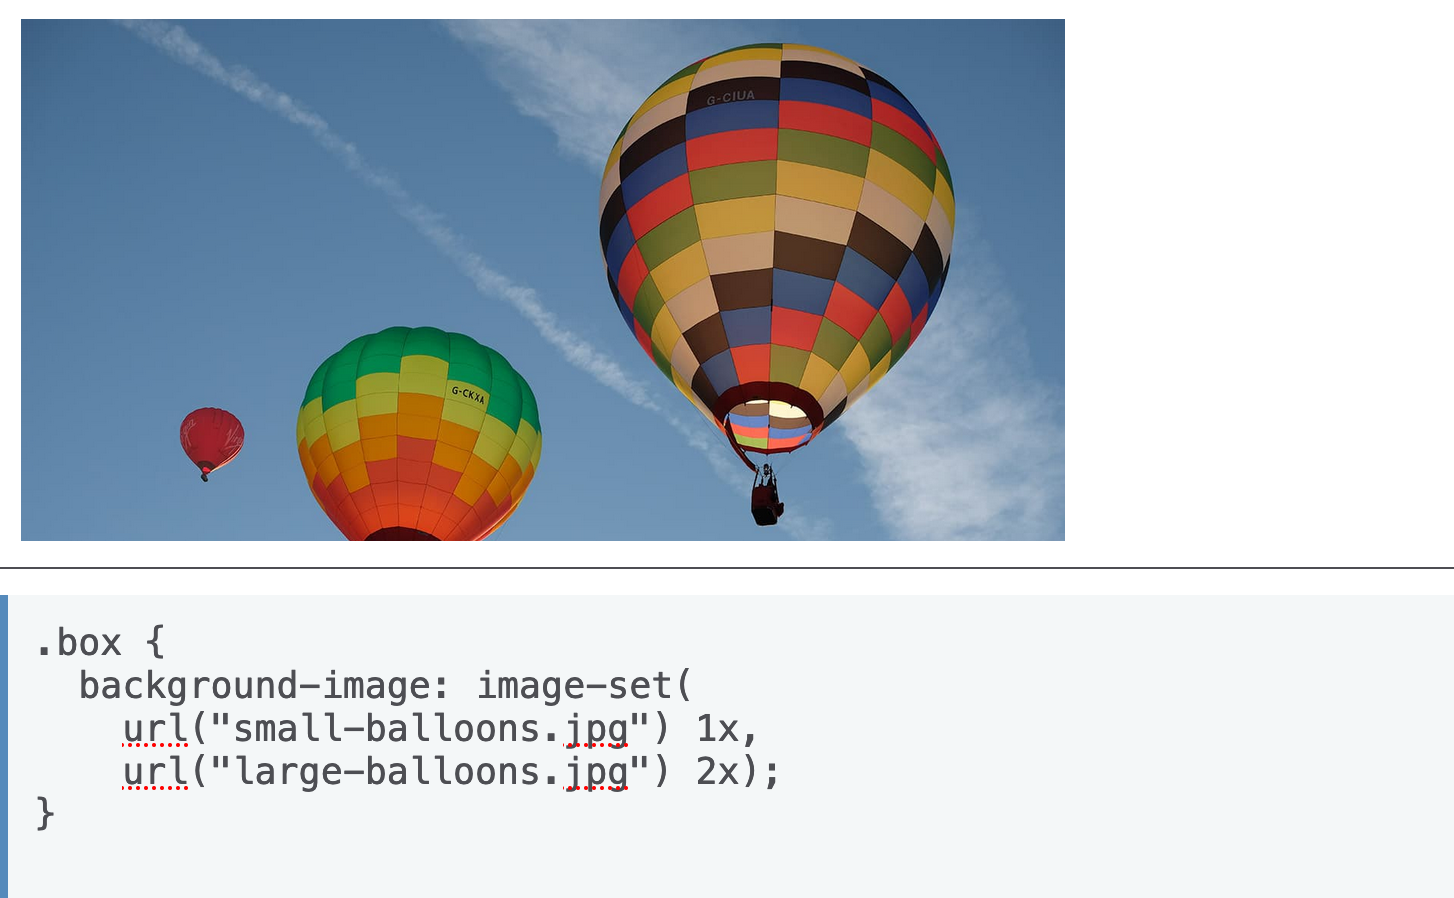 image-set call in CSS.